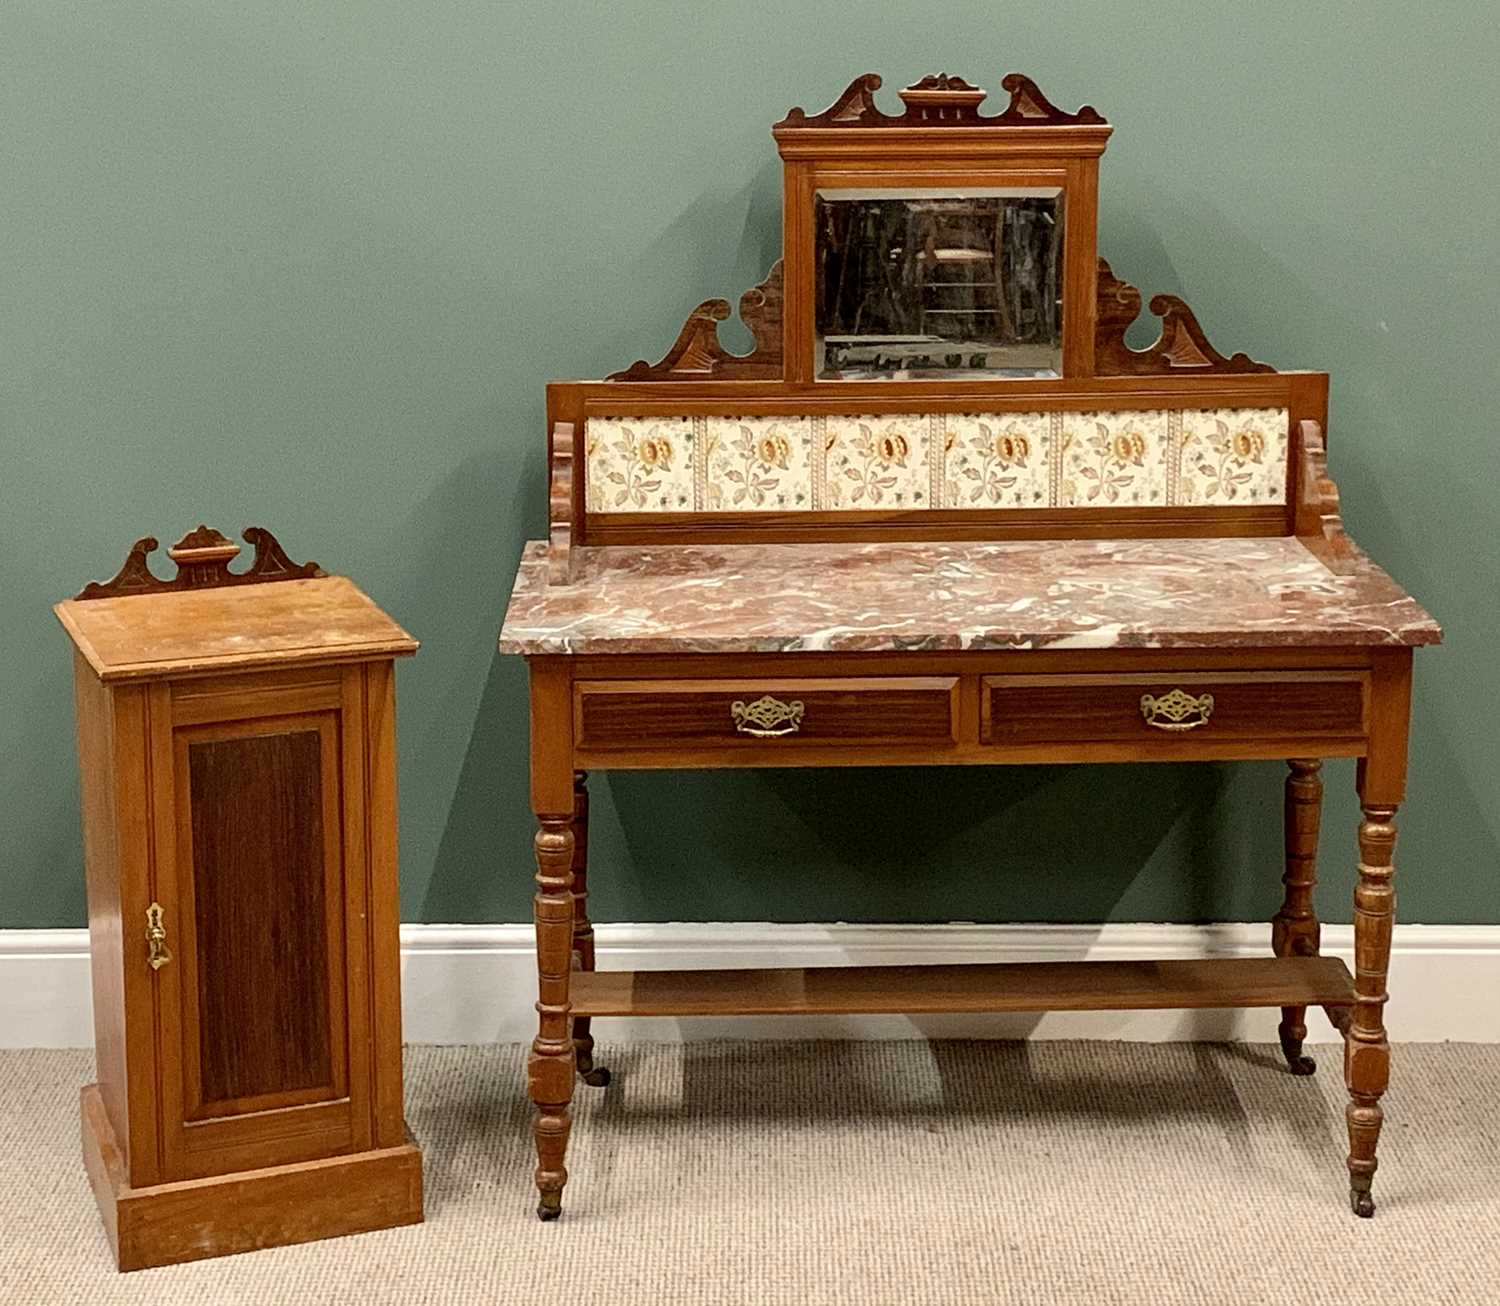 EDWARDIAN BEDROOM FURNITURE to include mirrored washstand with marble top and tiled back, an